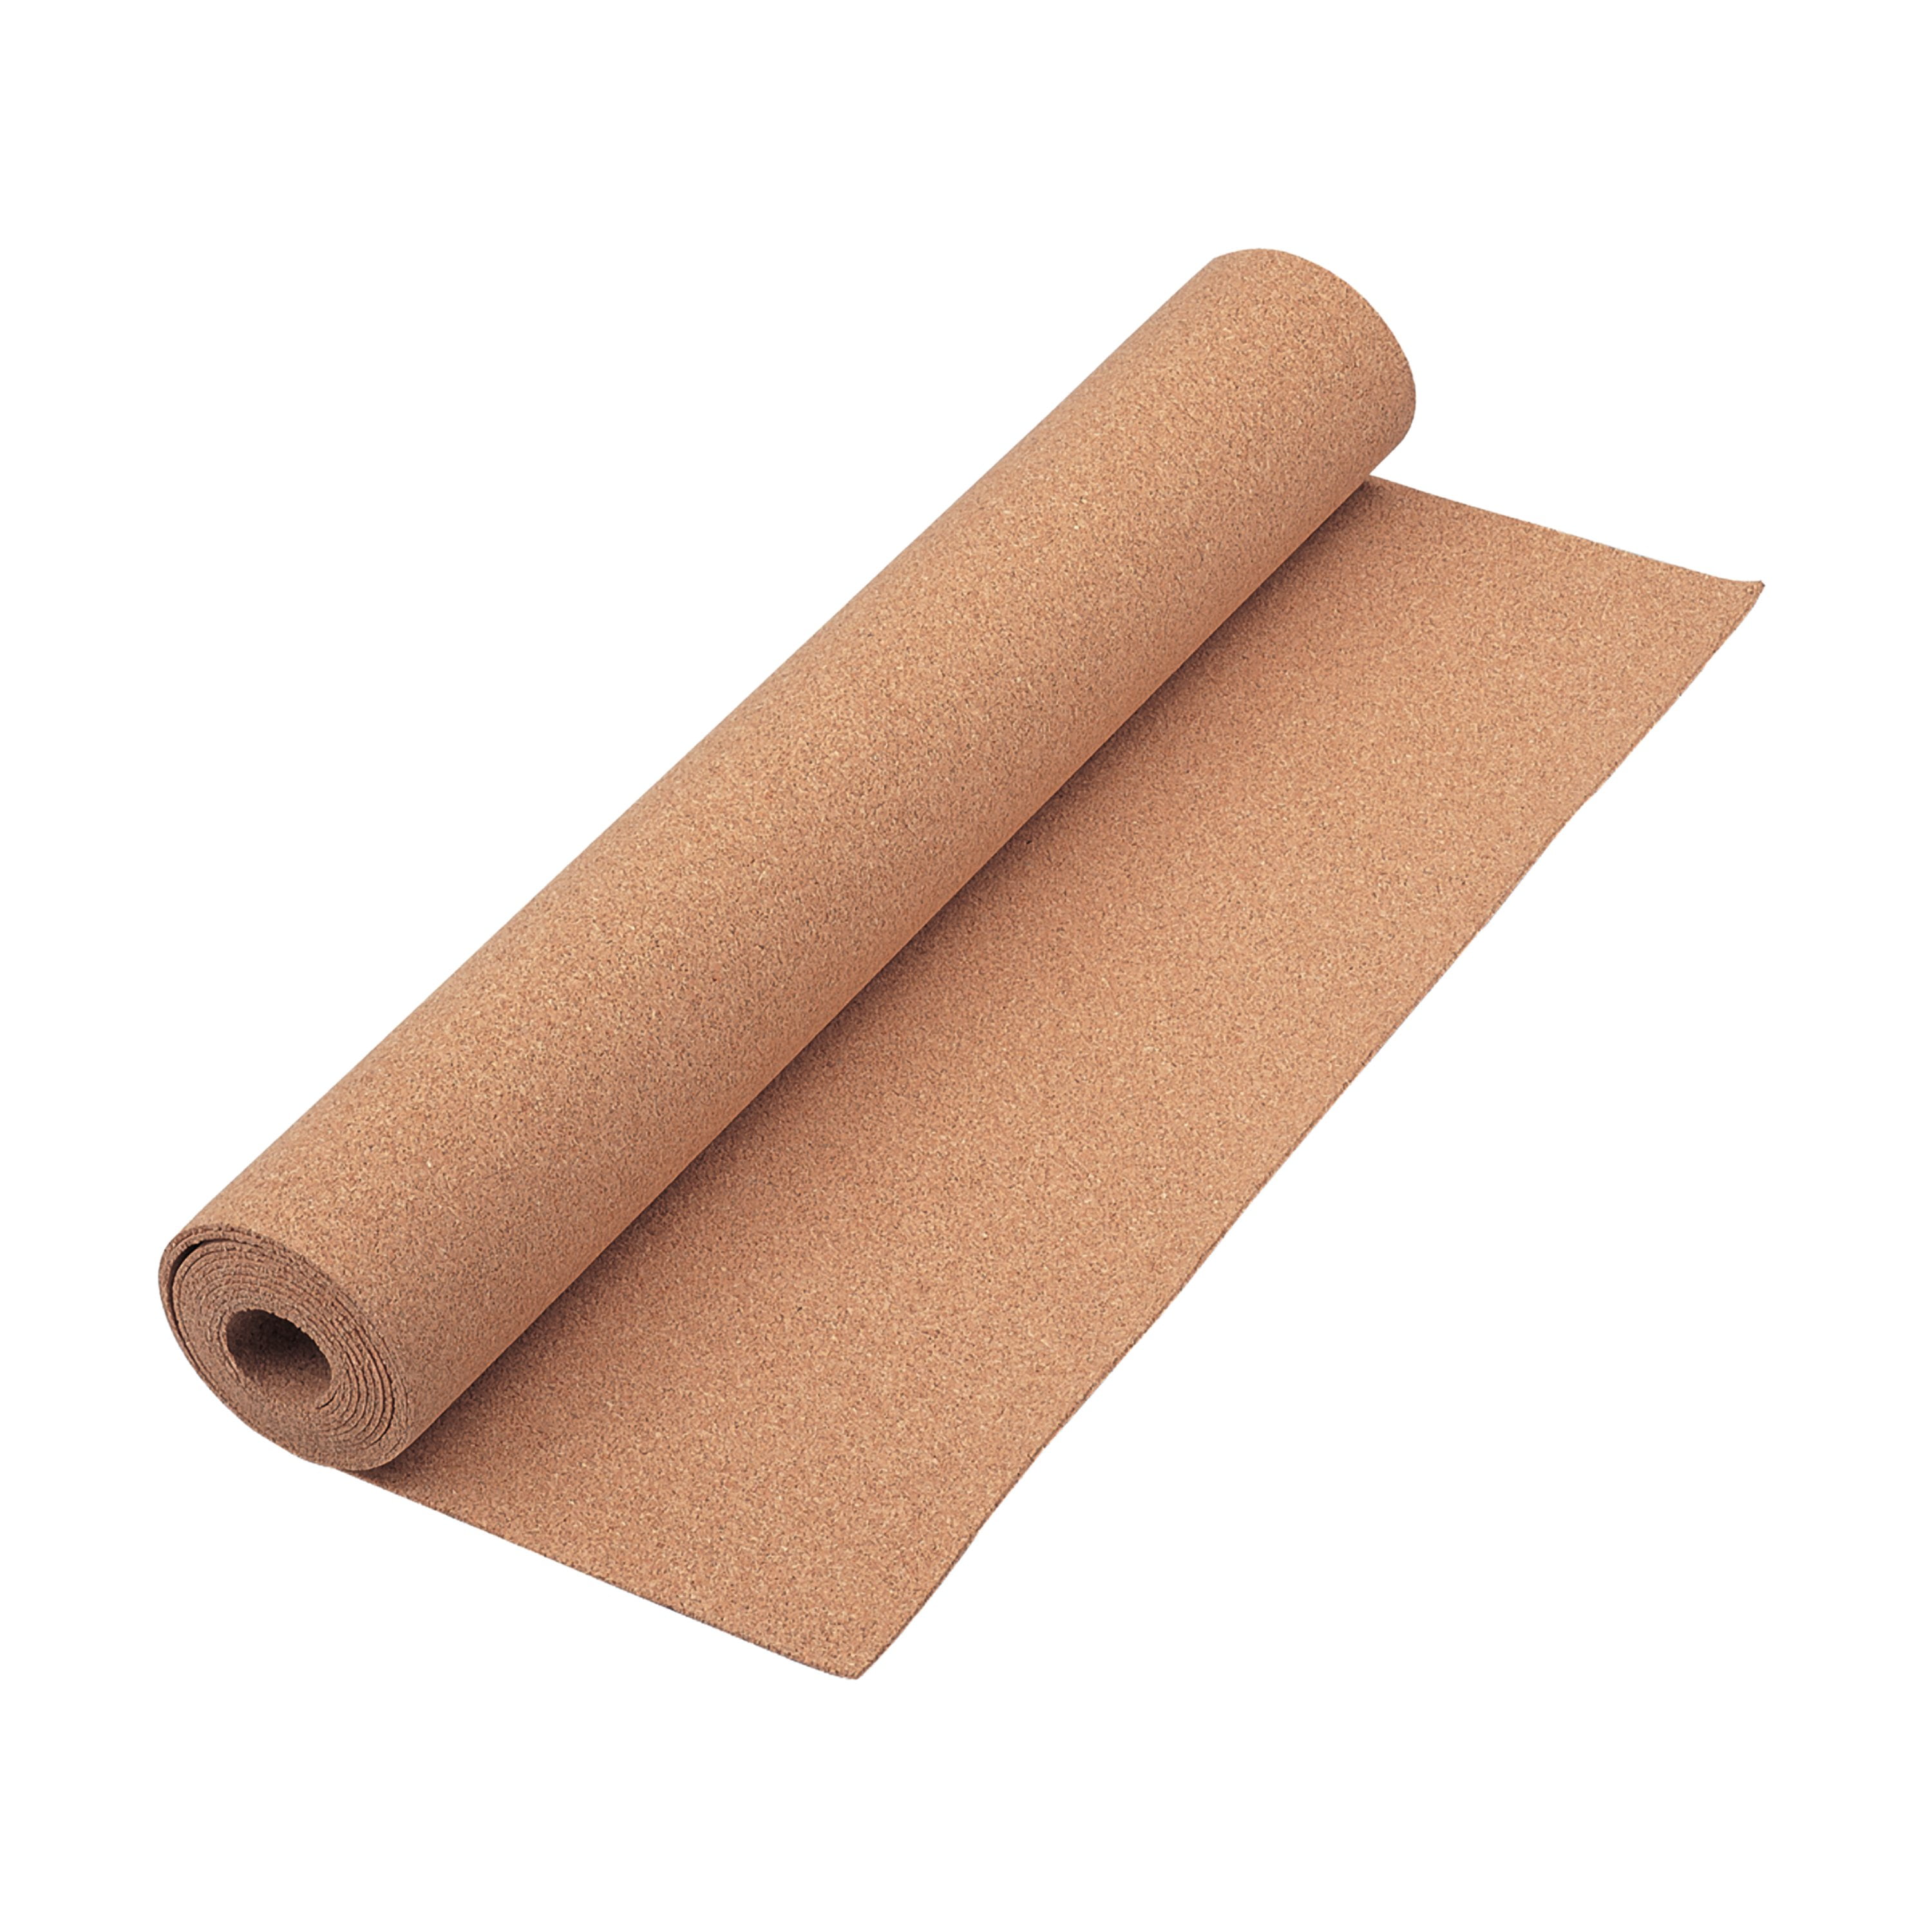 72 x 1/4 Colored Cork Roll, Cut to Length